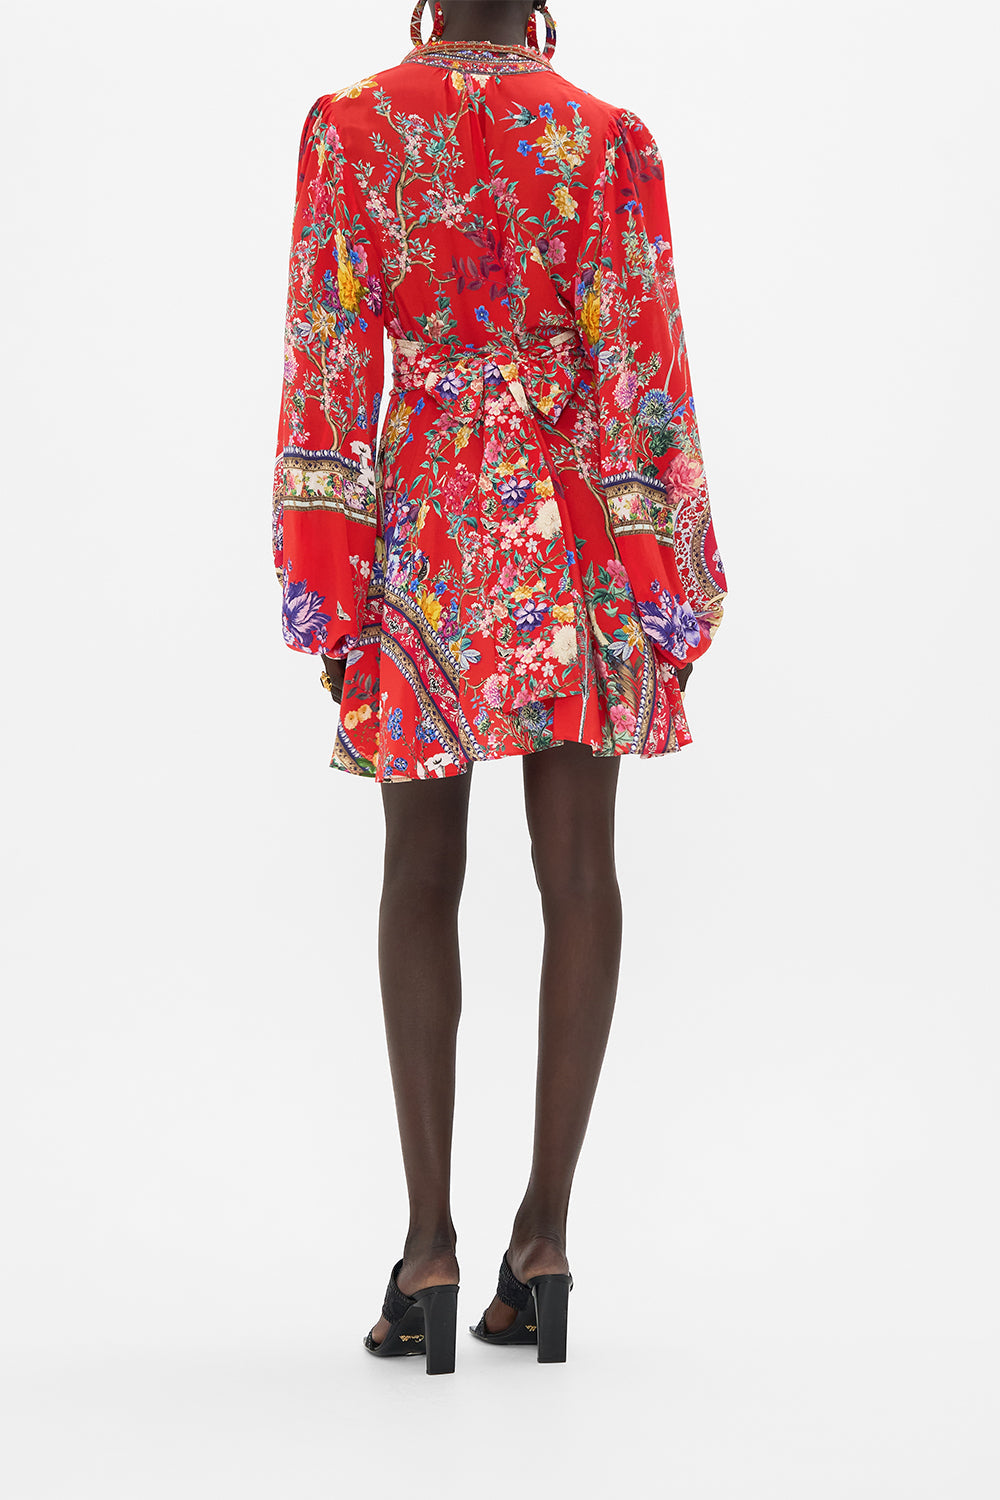 CAMILLA floral print mini dress in The Summer Palace print